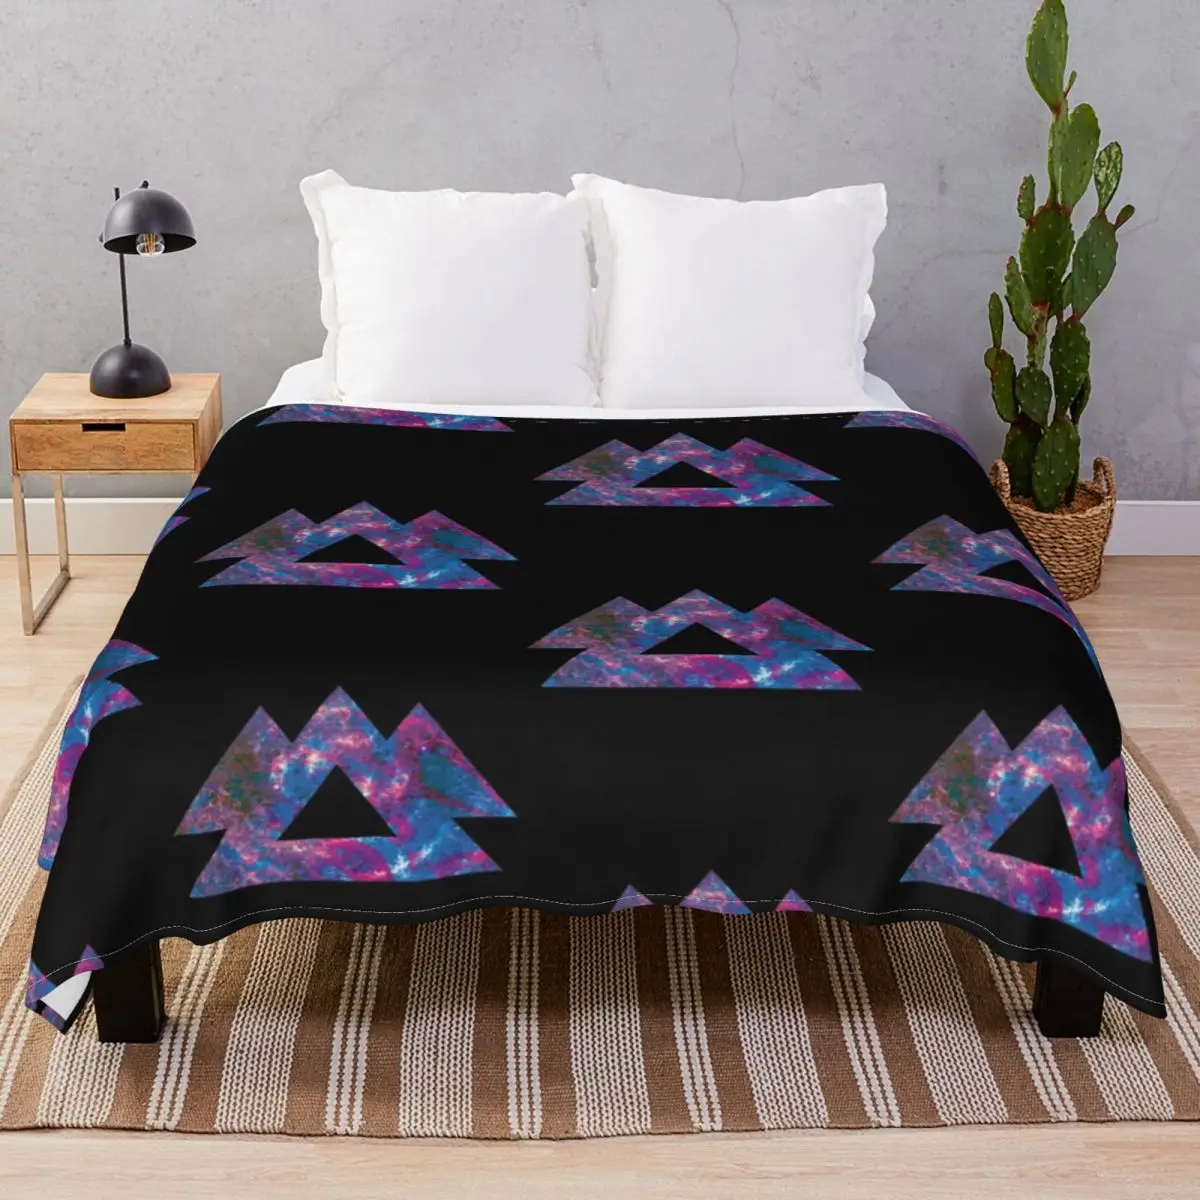 

Trippy Wakaan Blanket Flannel Plush Print Multifunction Throw Blankets for Bedding Home Couch Camp Cinema